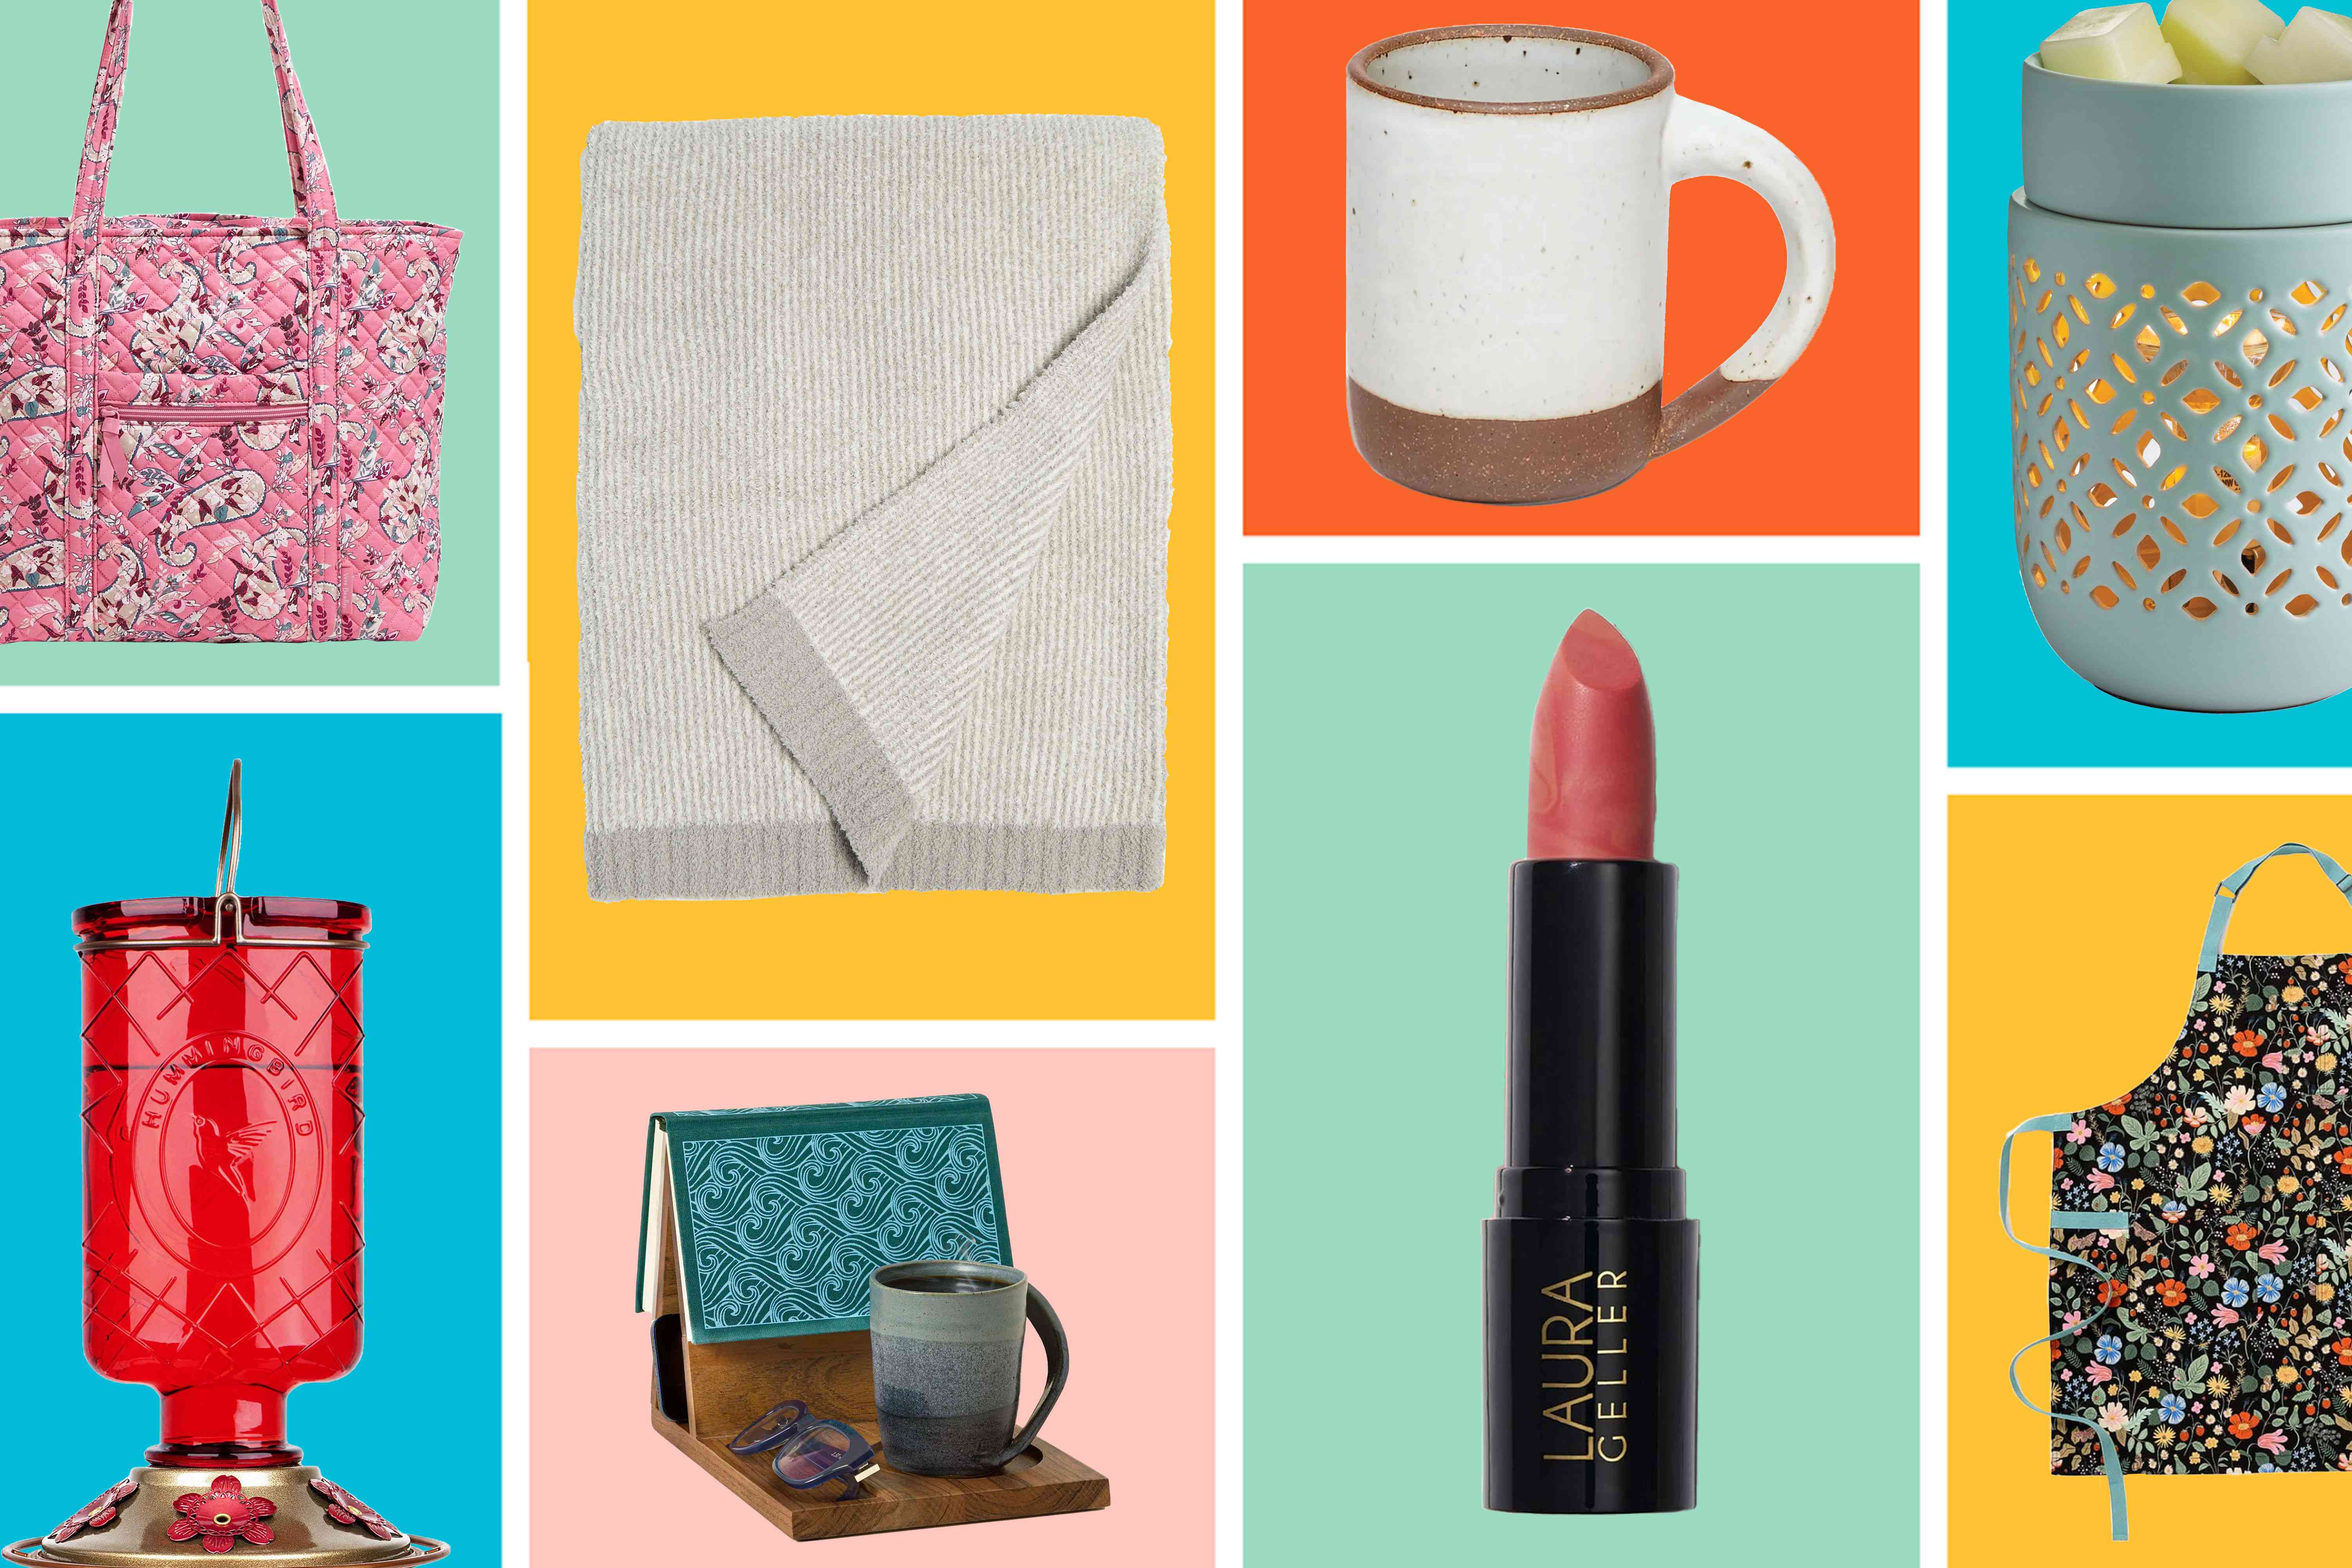 50 Unique, Practical, and Thoughtful Gifts for Grandmas That Start at Just $9